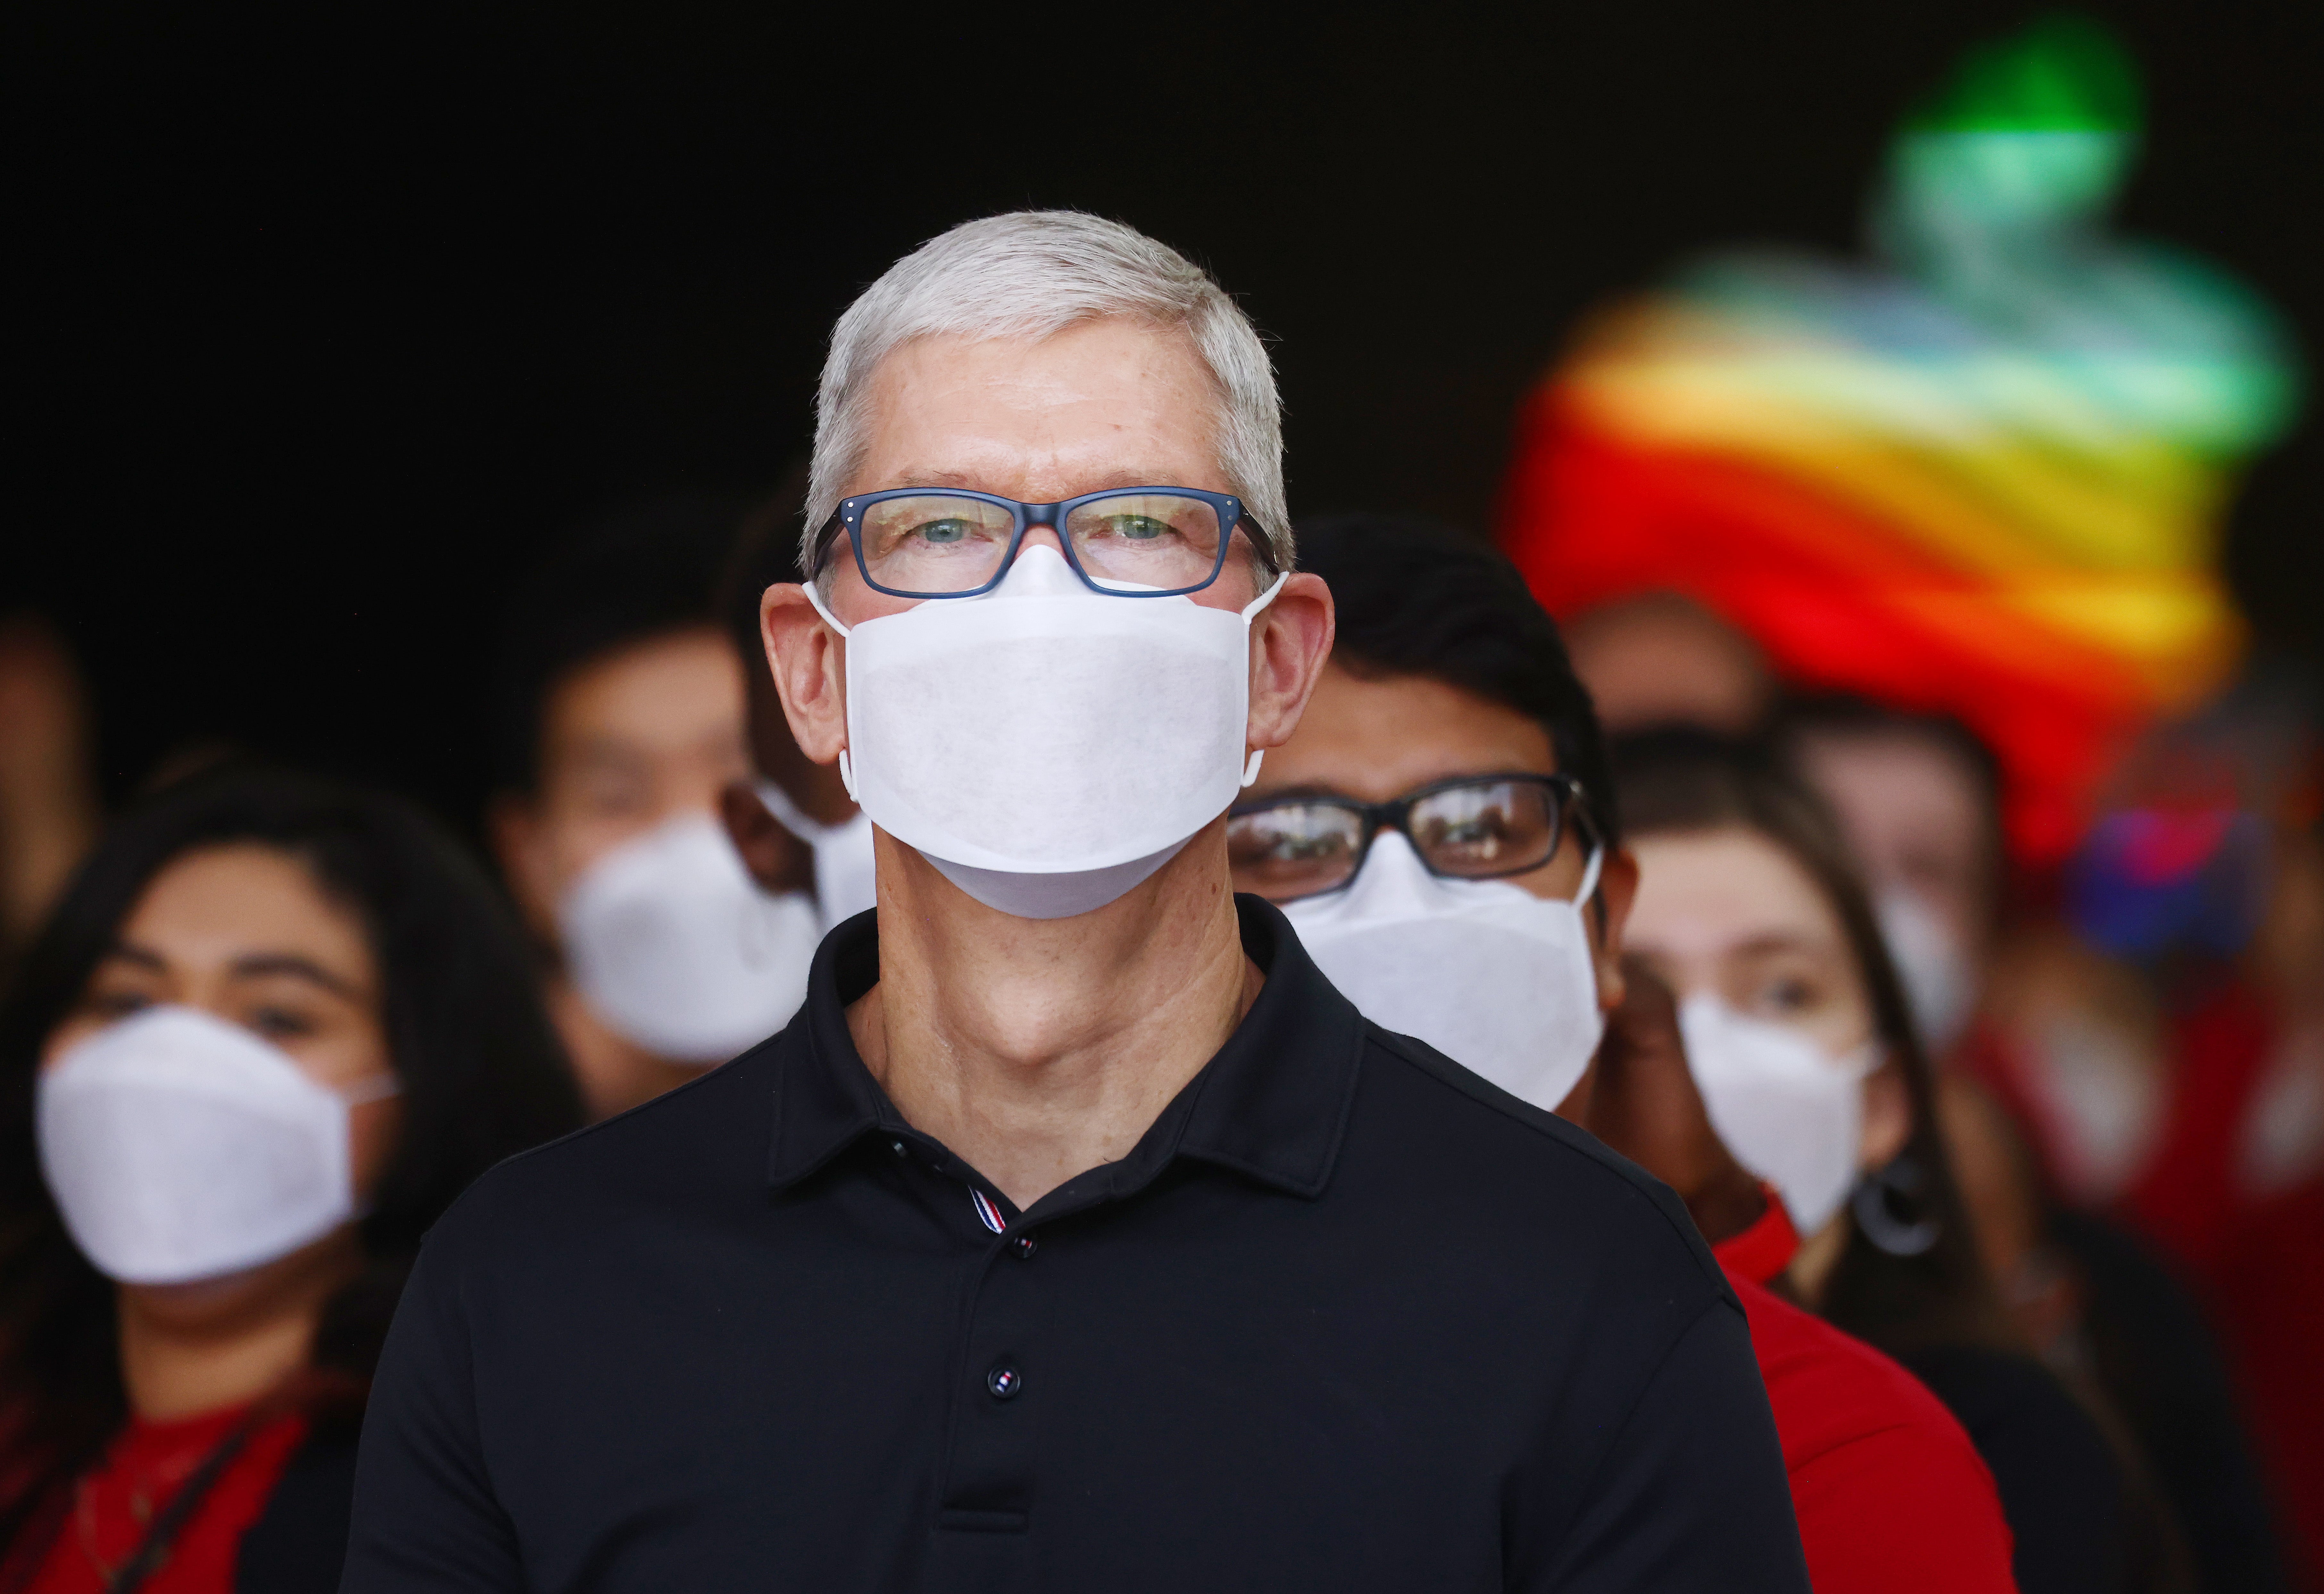 Apple CEO Tim Cook was allegedly stalked by the woman for more than a year